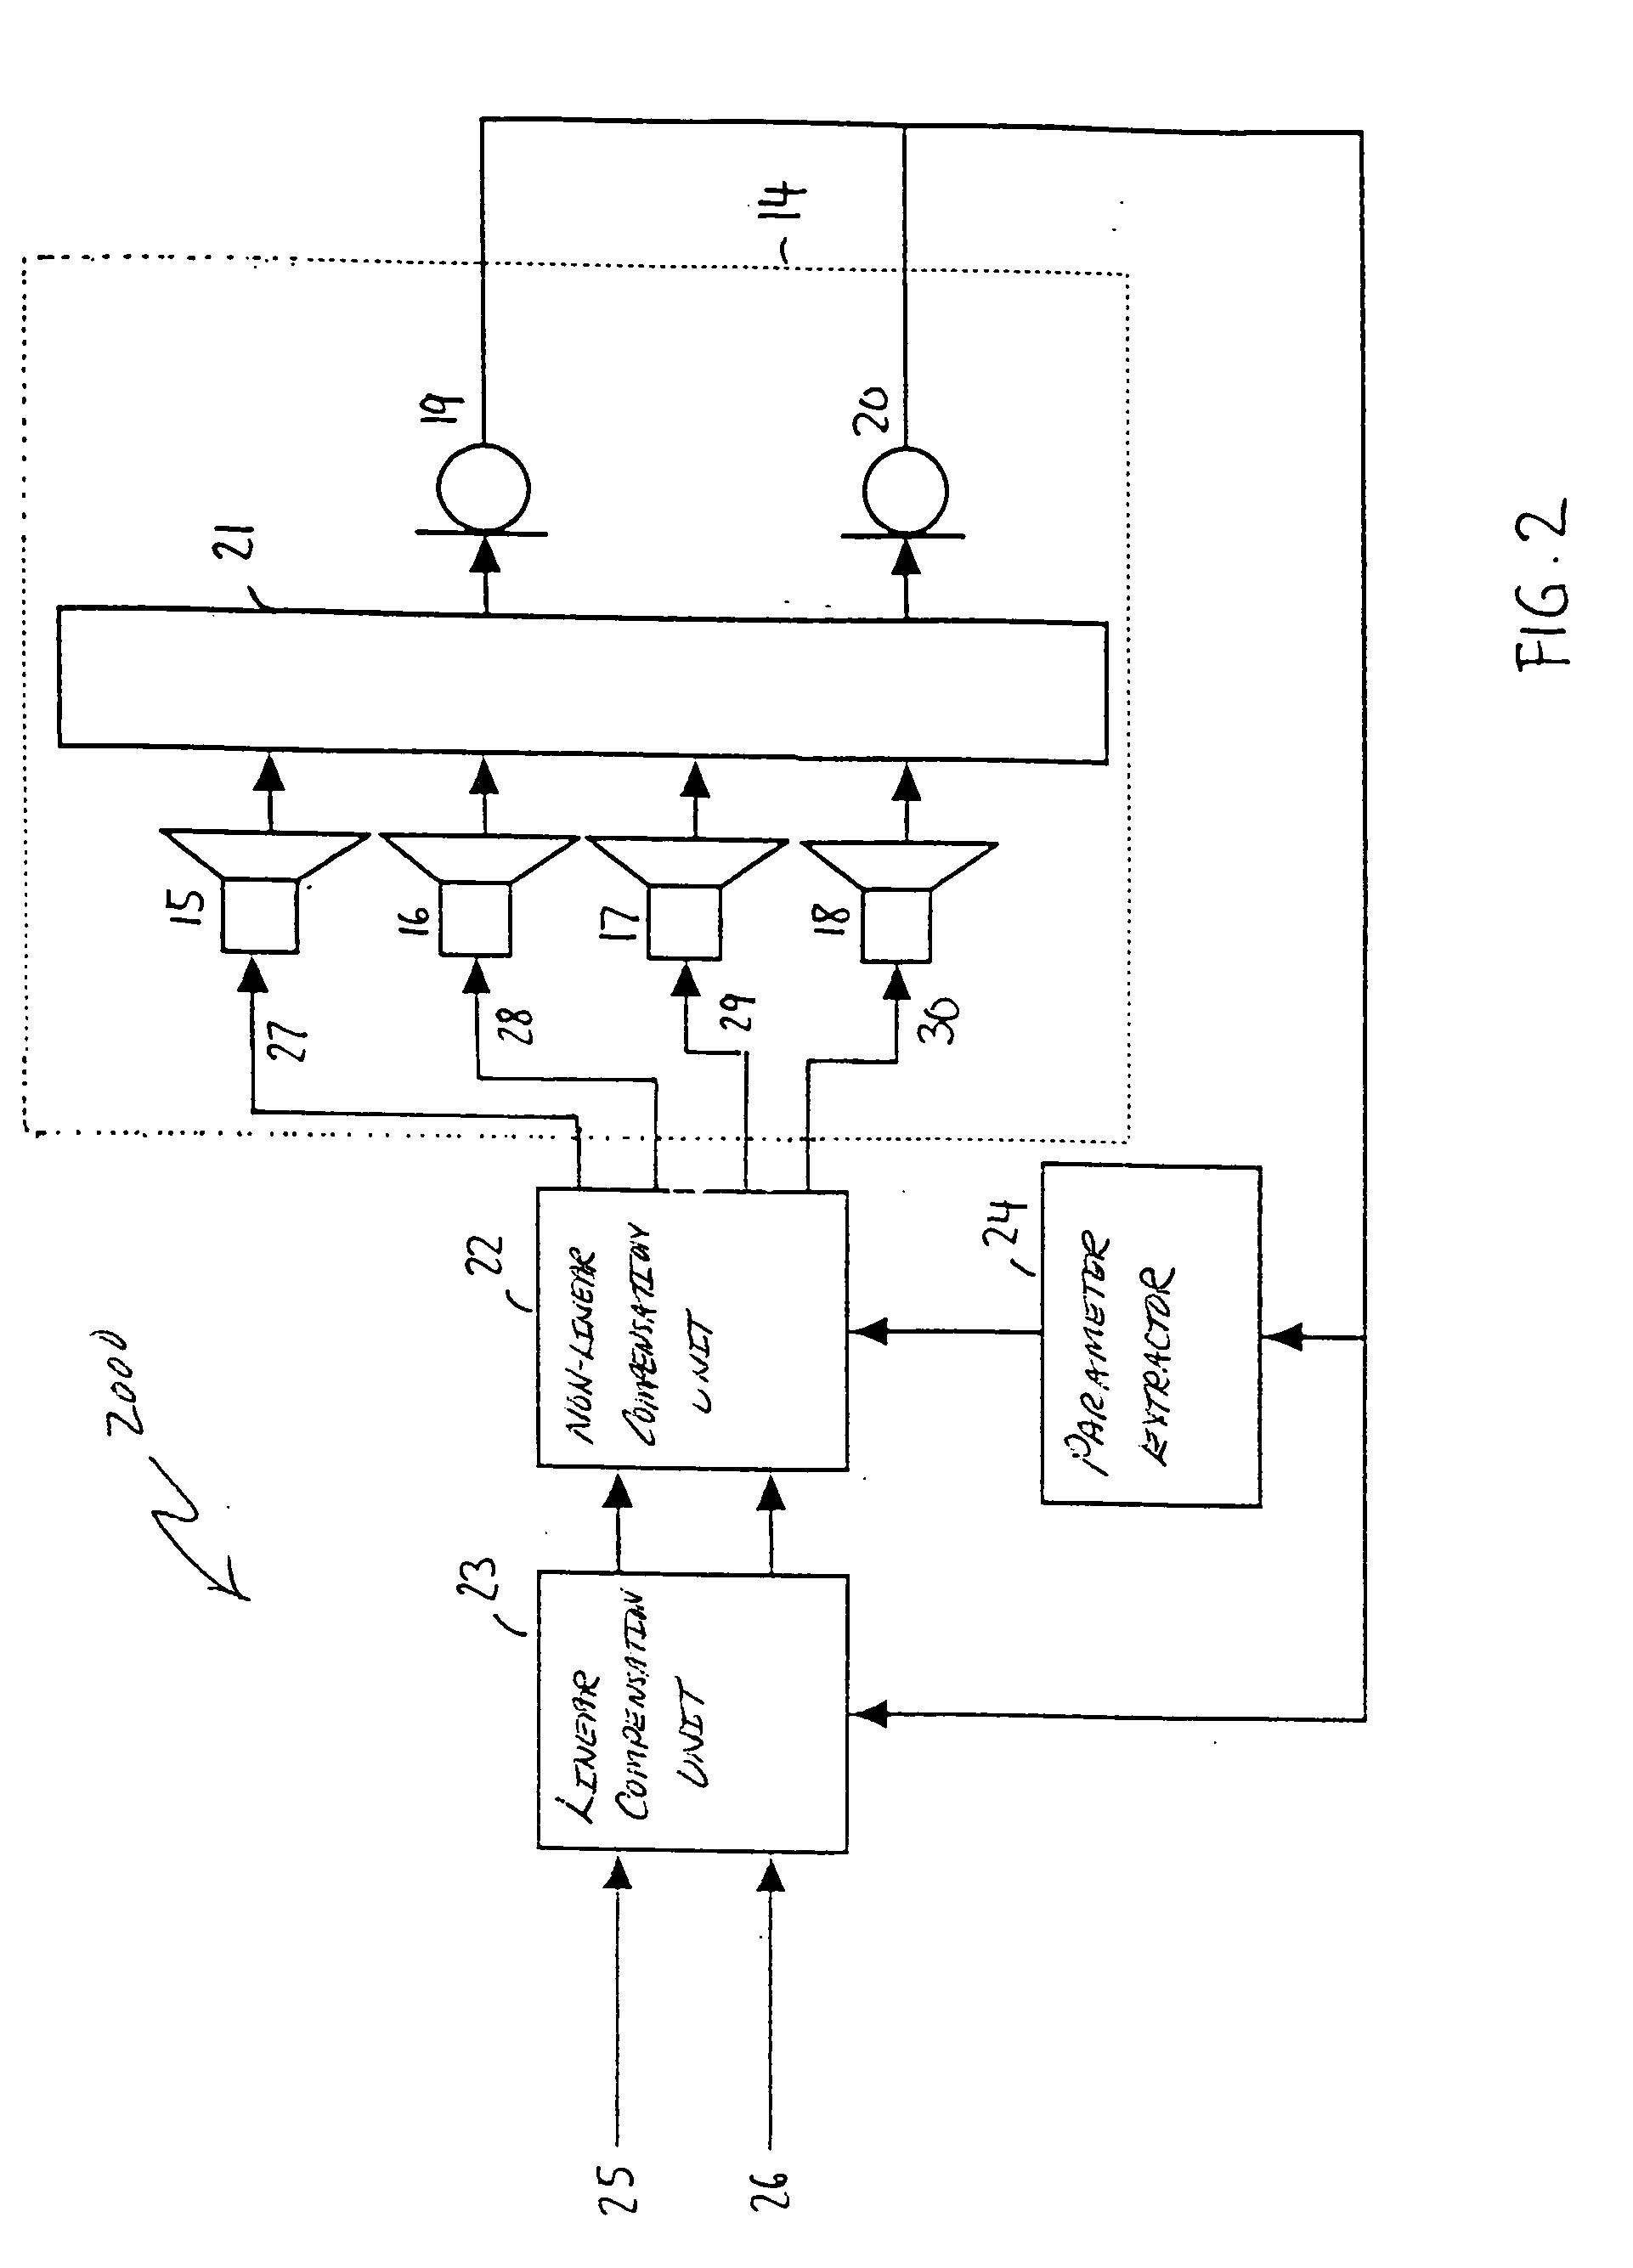 Stereo audio-signal processing system